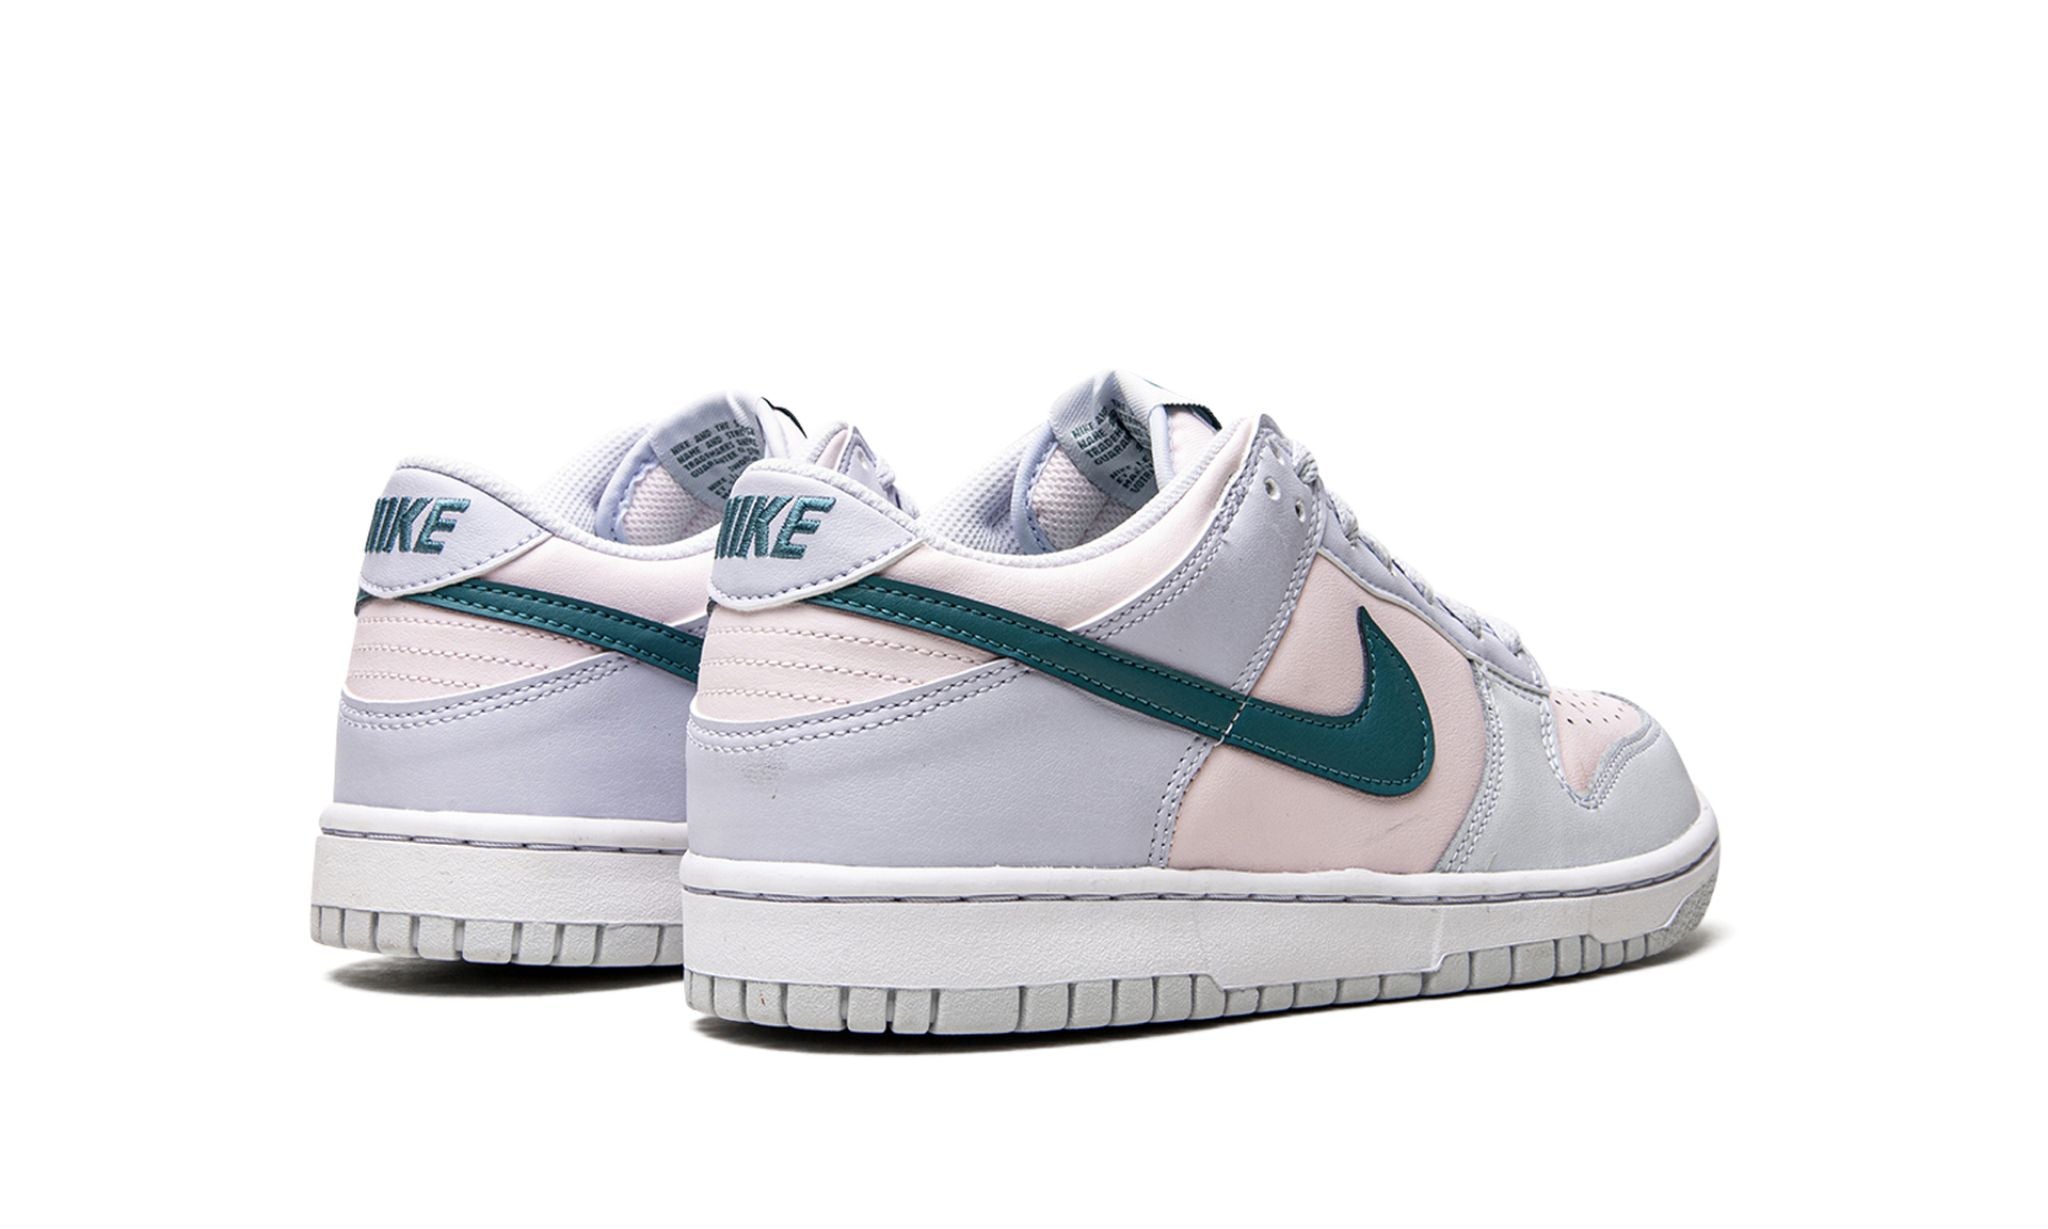 Nike Dunk Low “Mineral Teal” (GS)